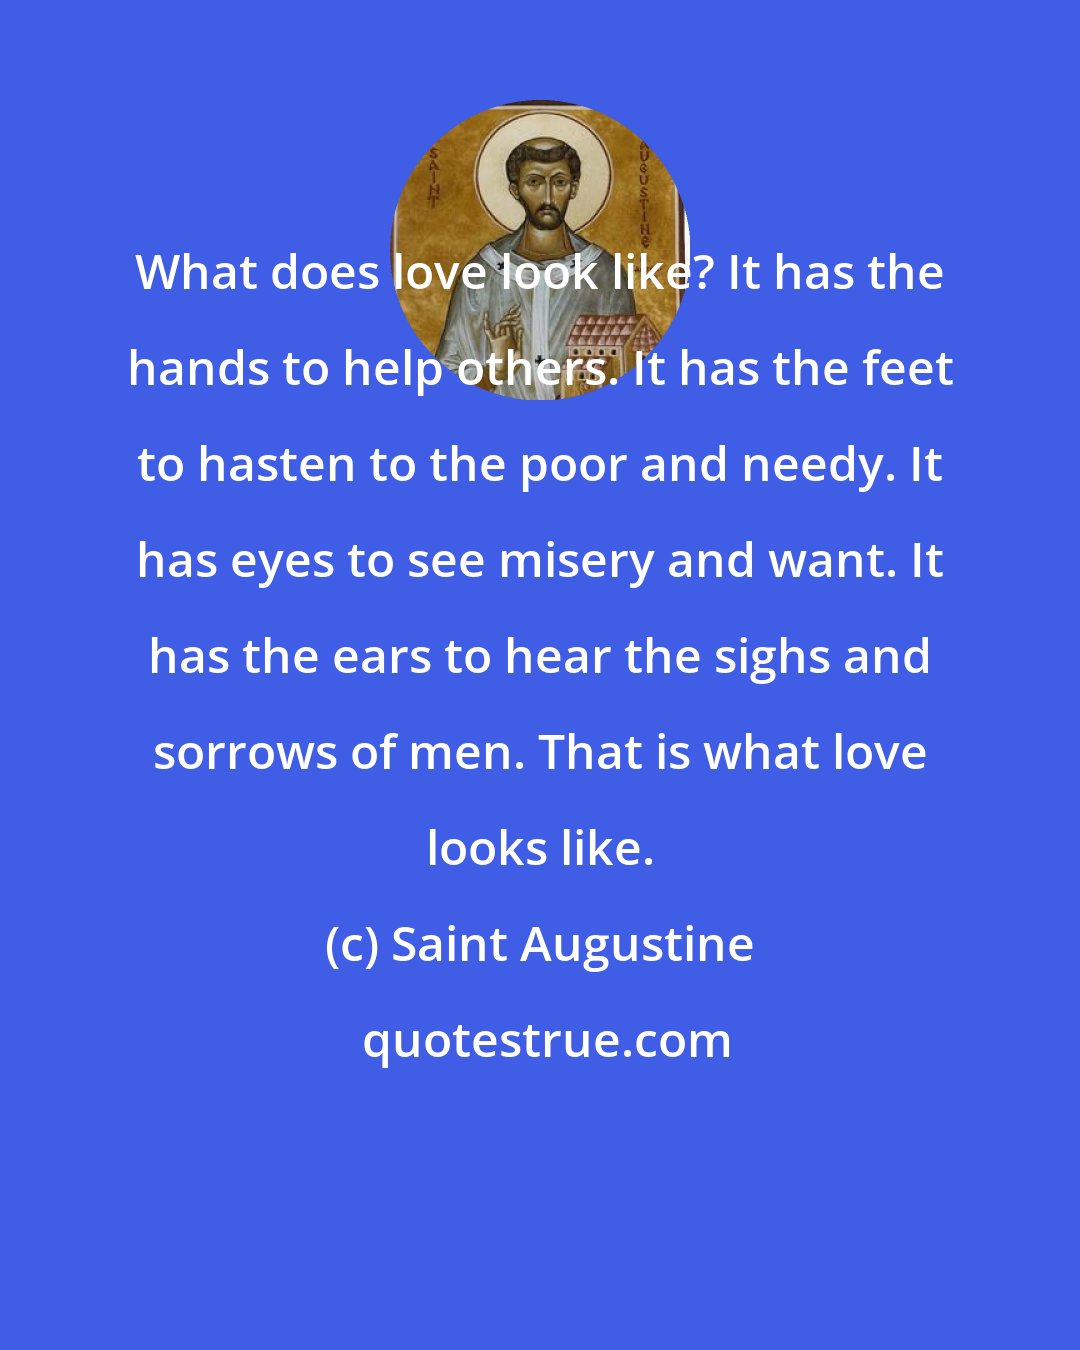 Saint Augustine: What does love look like? It has the hands to help others. It has the feet to hasten to the poor and needy. It has eyes to see misery and want. It has the ears to hear the sighs and sorrows of men. That is what love looks like.